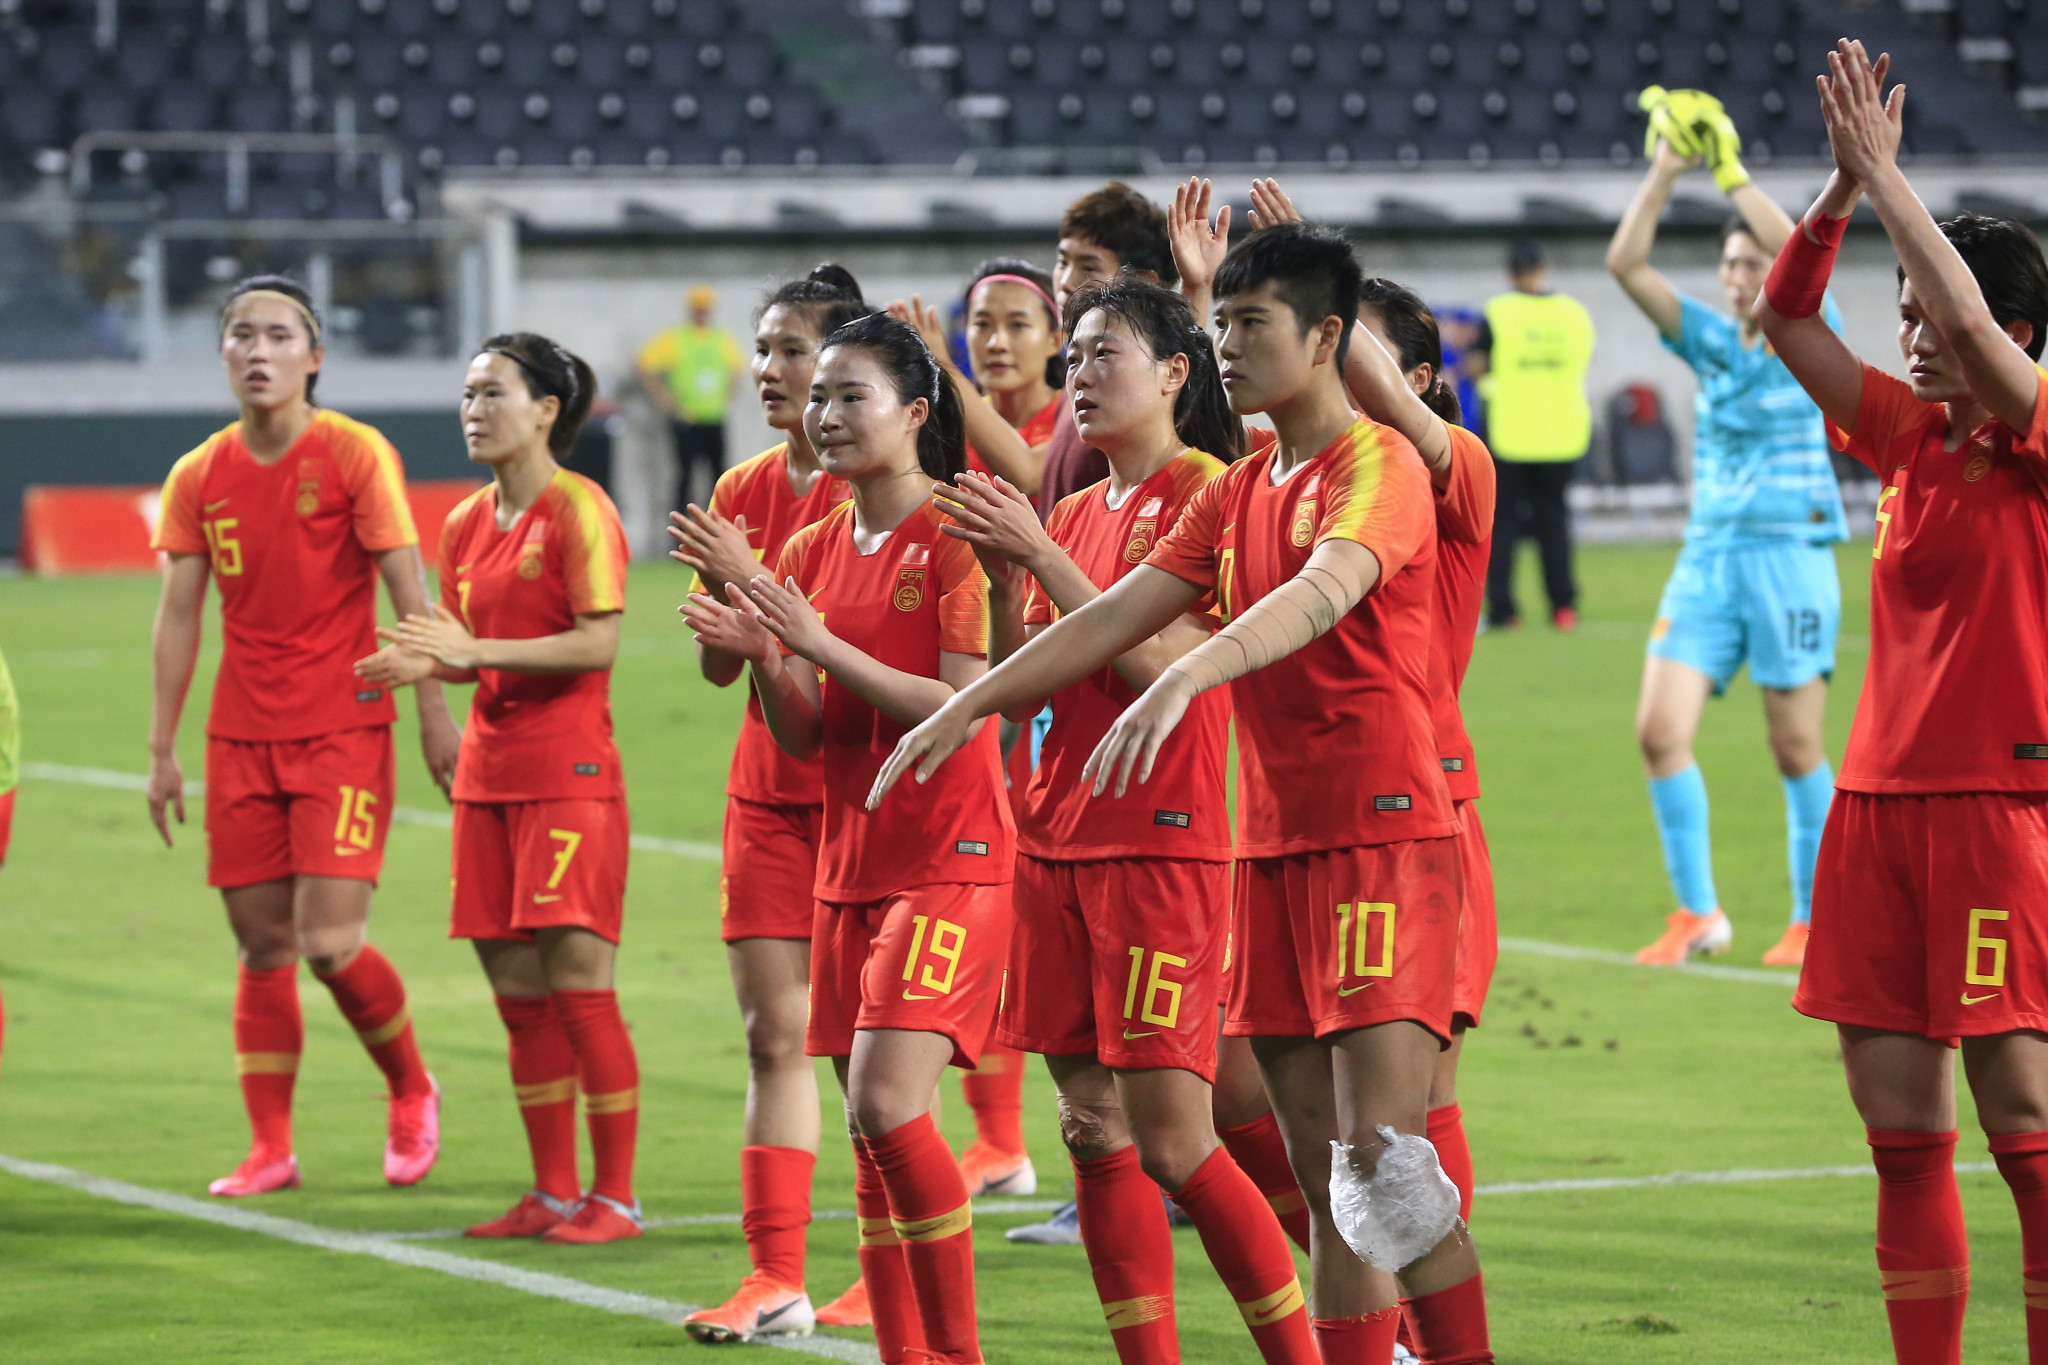 China and South Korea to meet in Tokyo 2020 women's football playoff in February